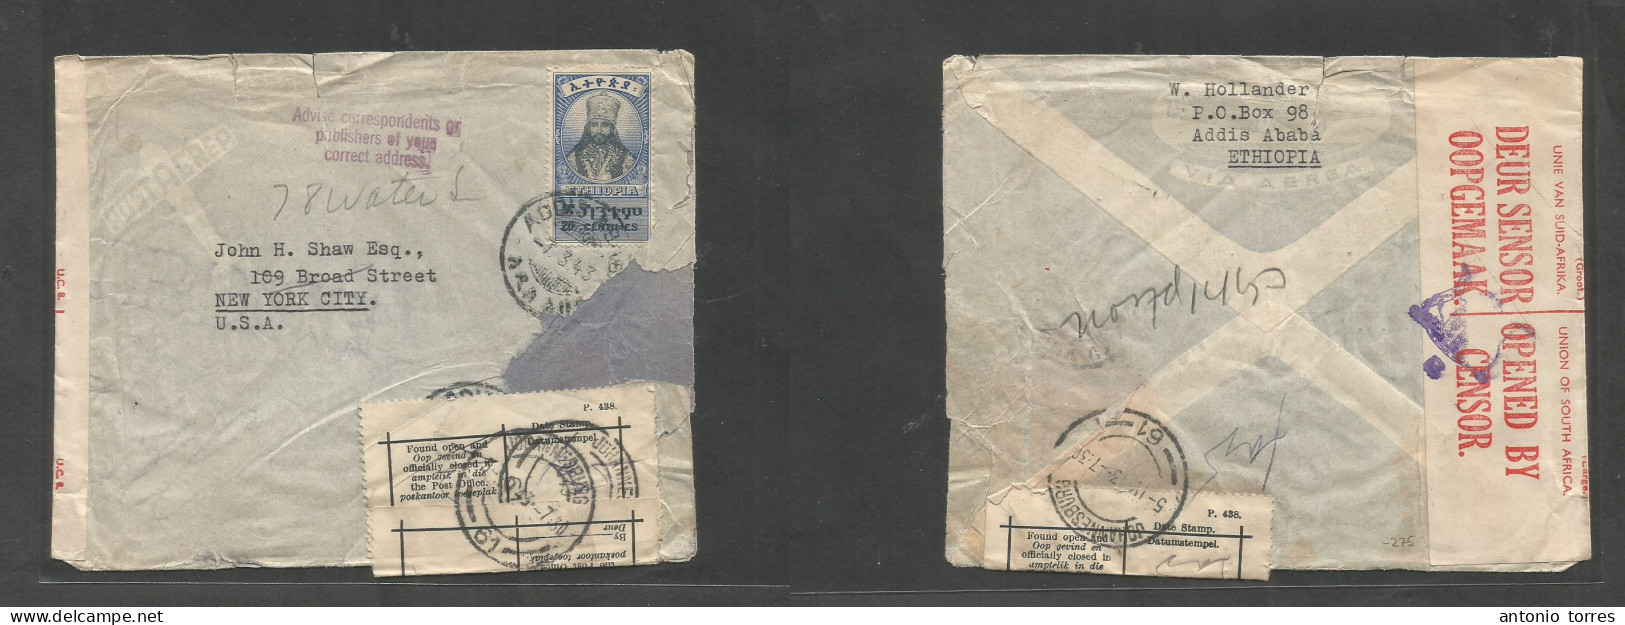 Ethiopia. 1943 (7 March) Addis Abeba - USA, NYC. Fkd Env 20c Rate + S. Africa Censor + Post Office Official Label Tied A - Äthiopien